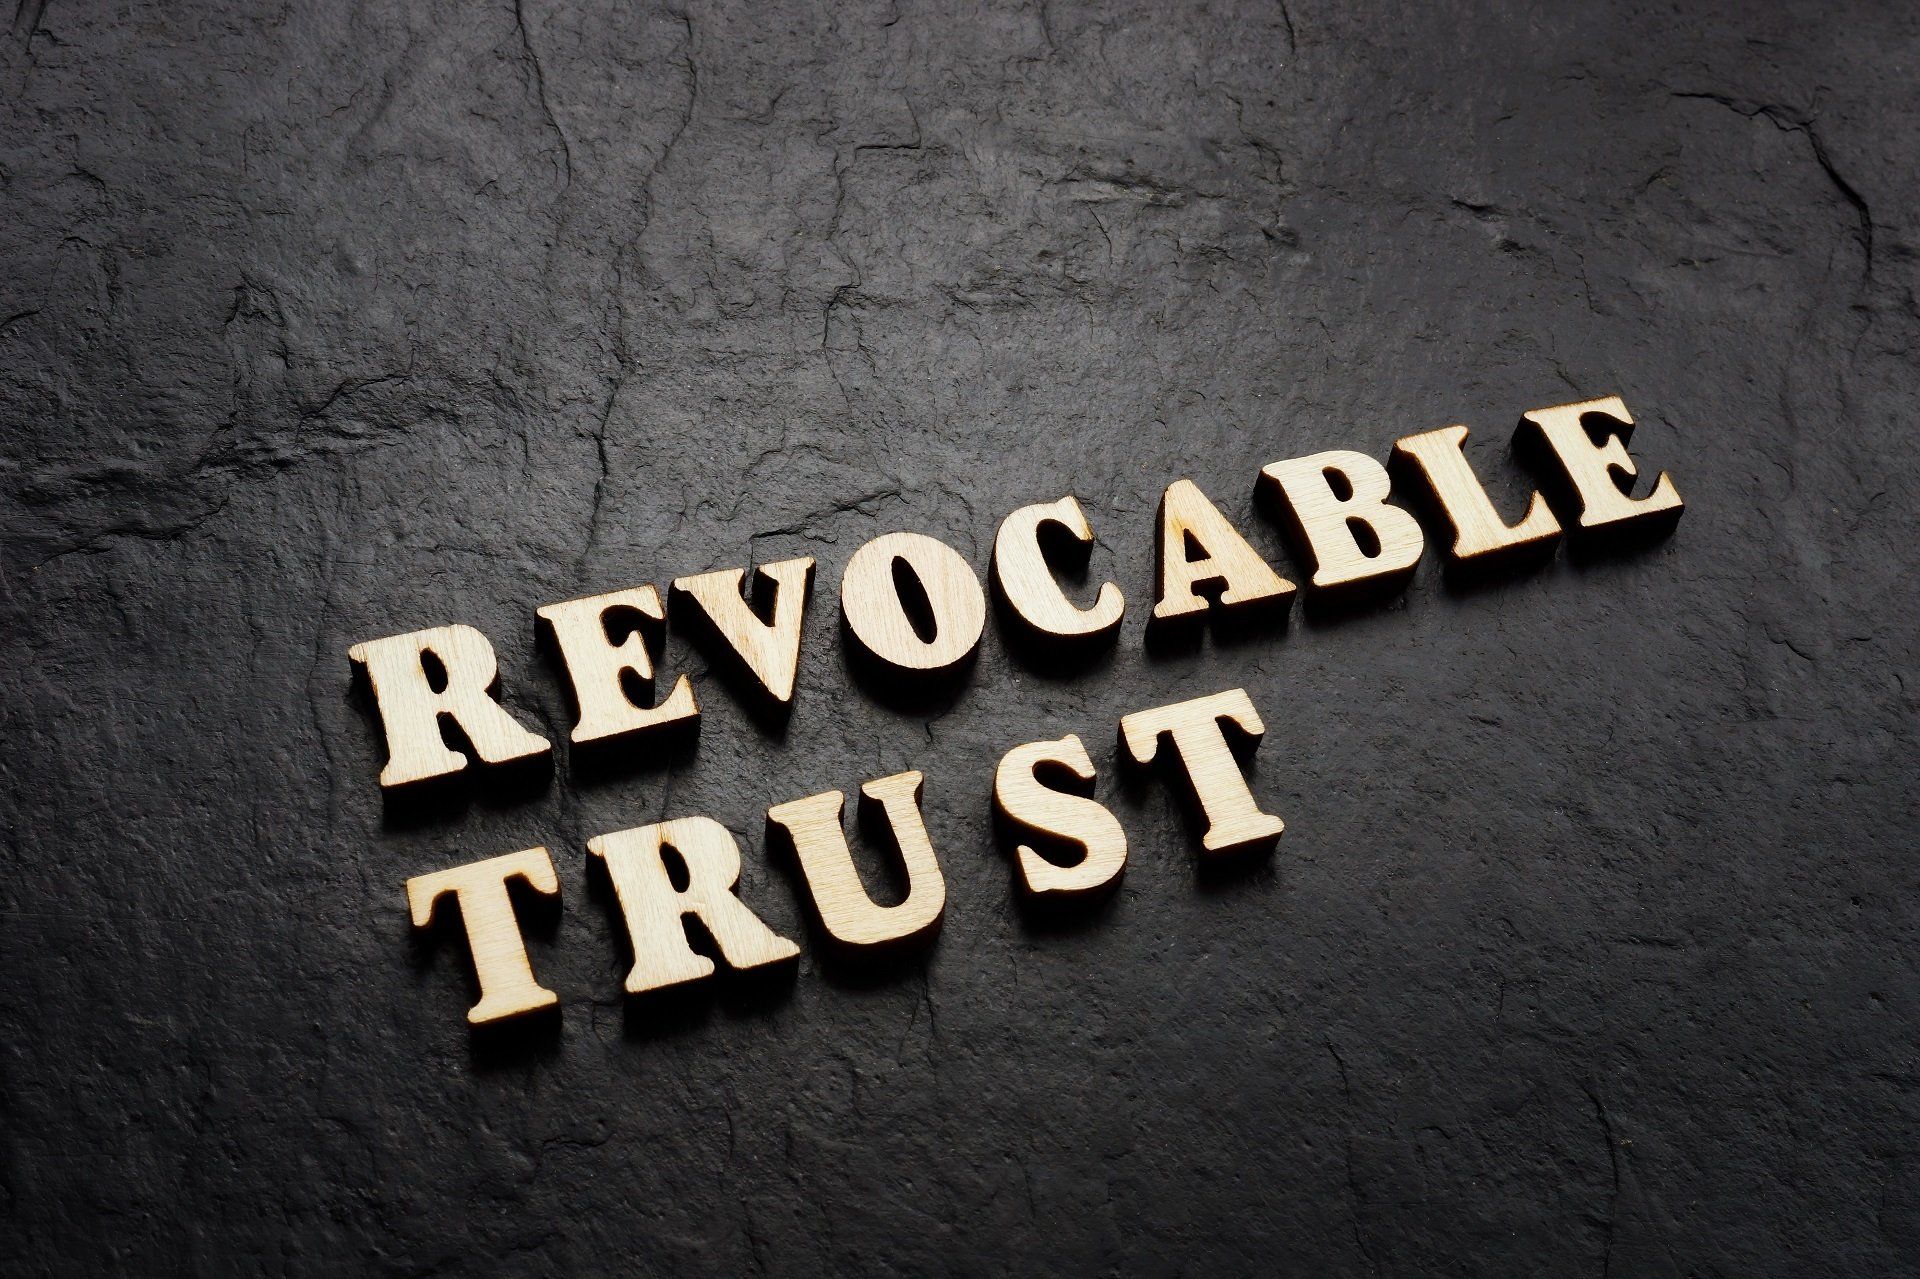 Florida Irrevocable Trust Law – Know Your Legal Rights